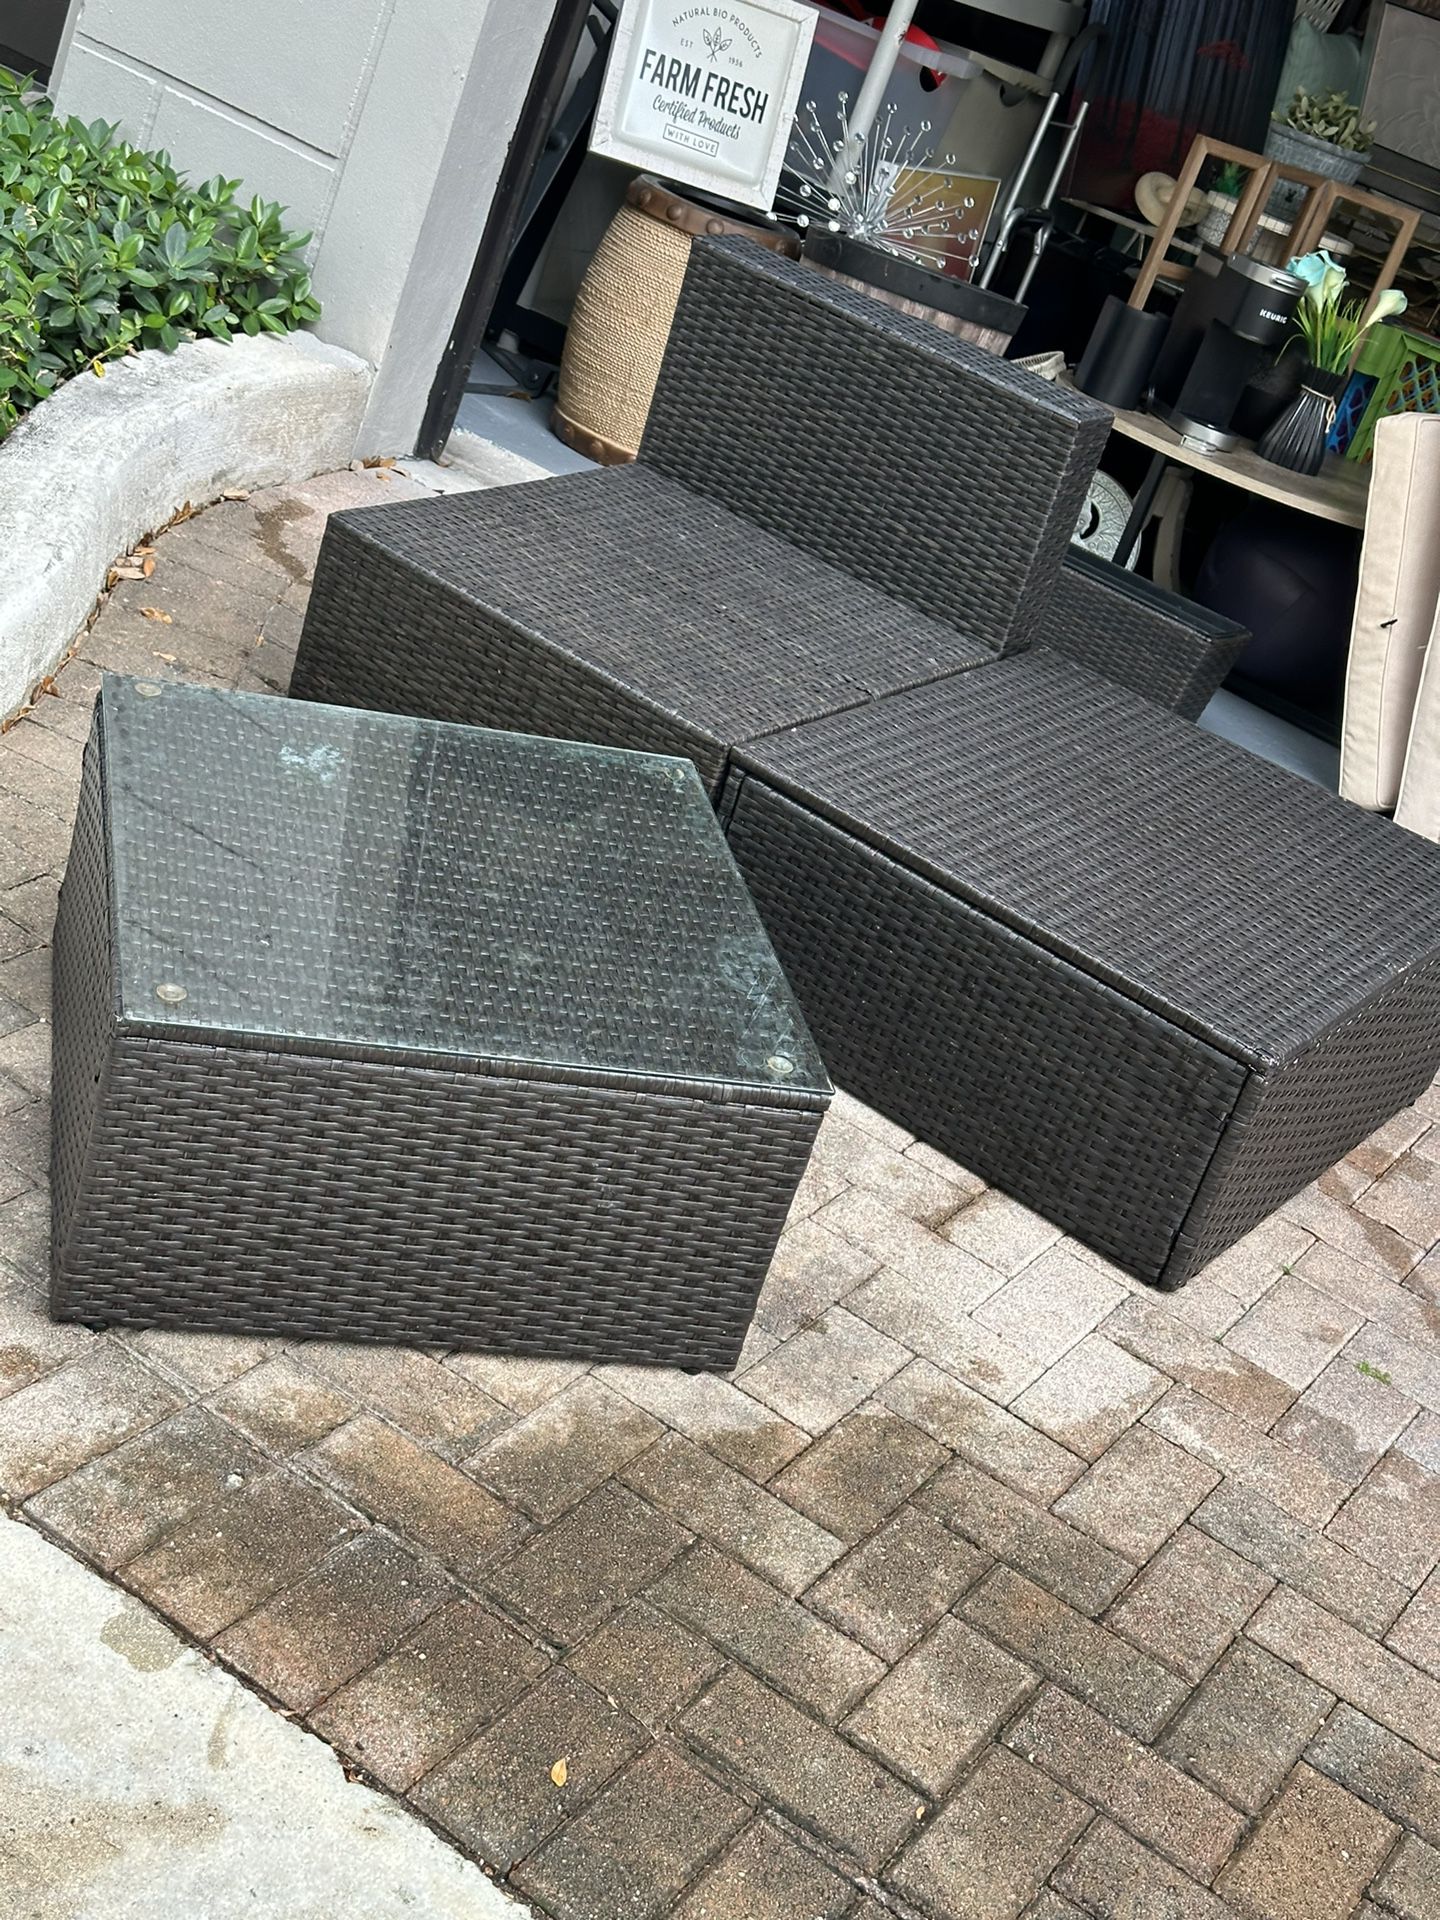 3 Pieces Wicker Resin Patio Furniture & Cushions